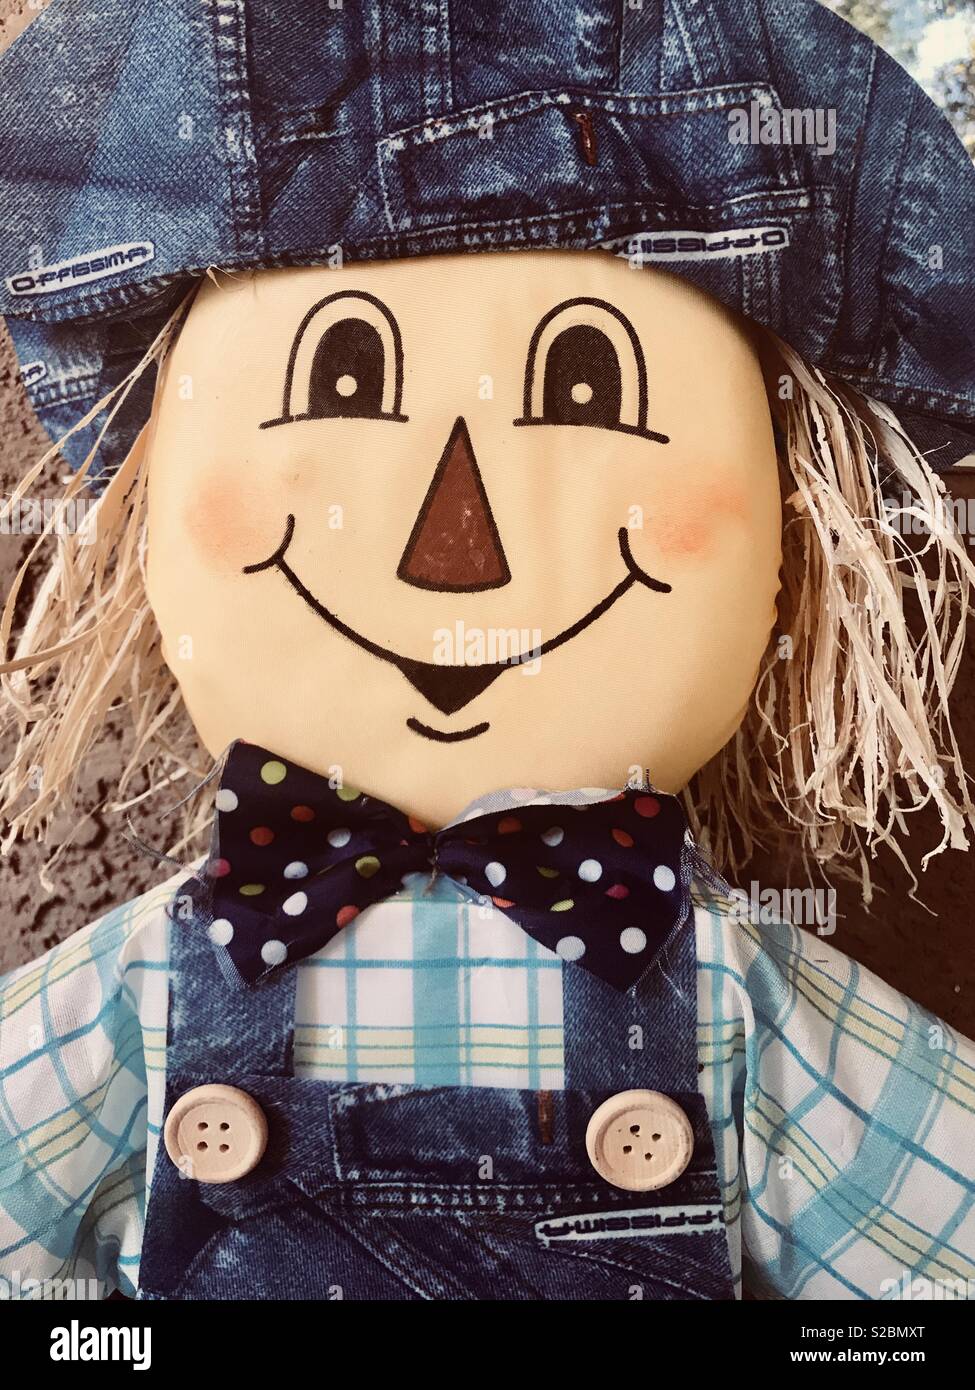 Scarecrow on display- straw hair, jean overalls a big grin and a bow tie  Stock Photo - Alamy